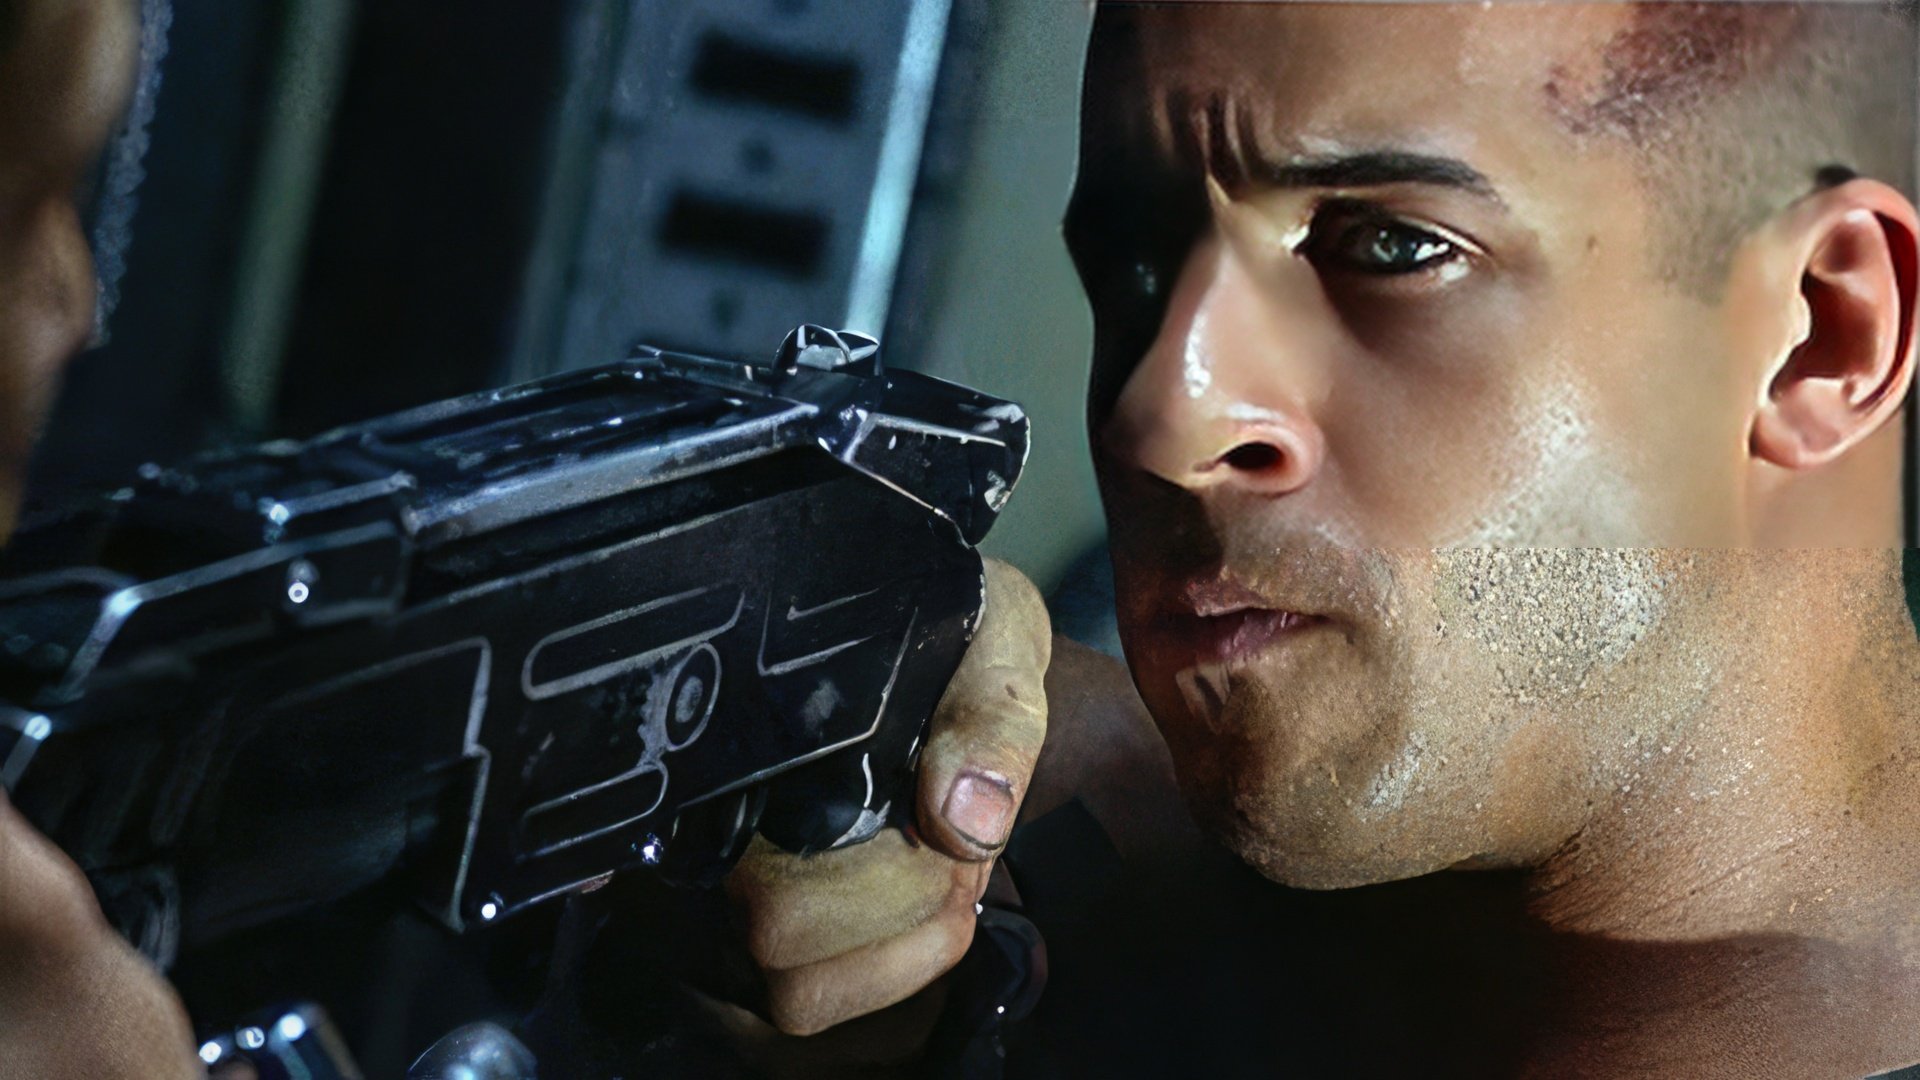 Riddick was one of the most famous images by Diesel